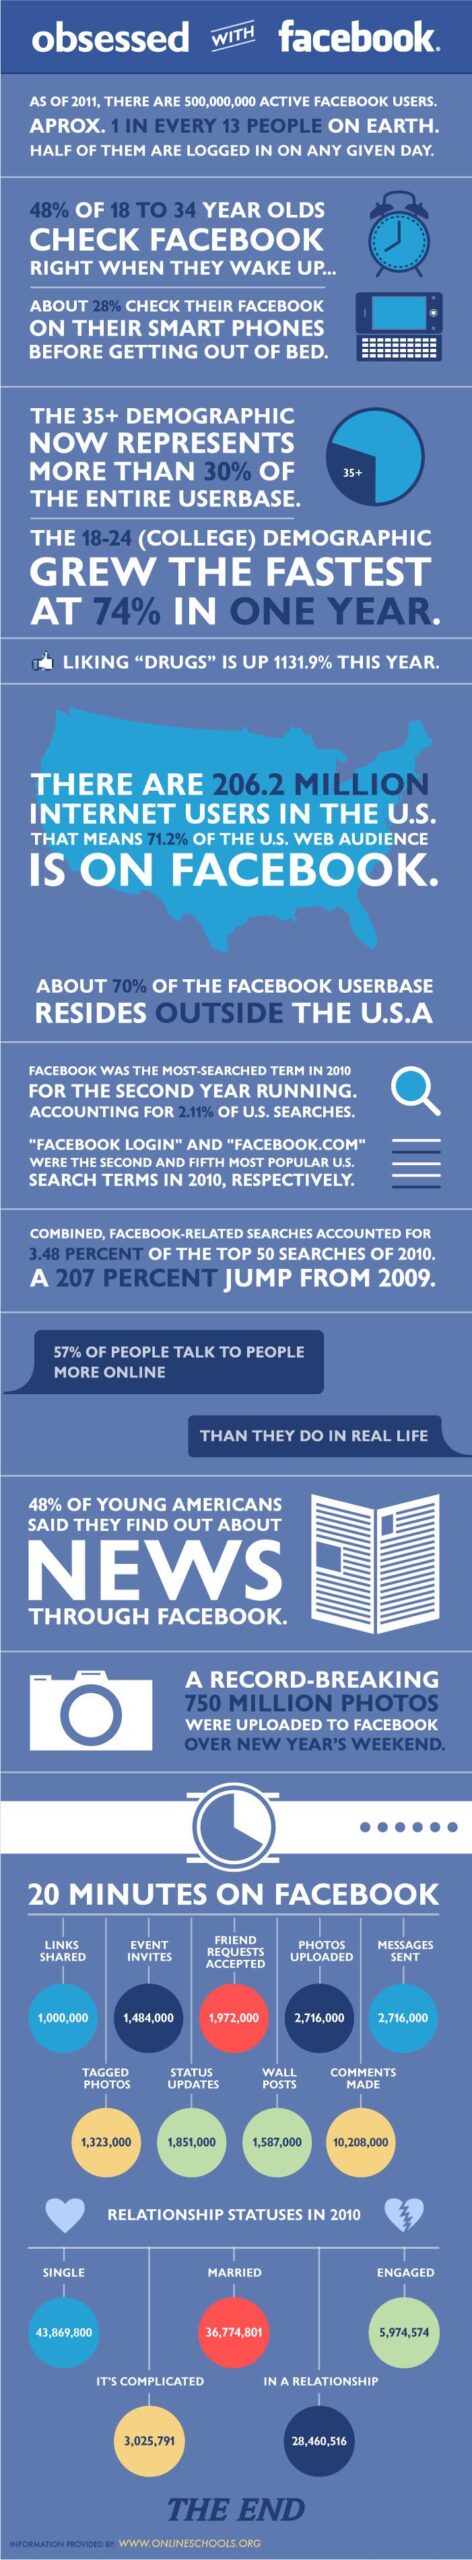 facebook-obsession